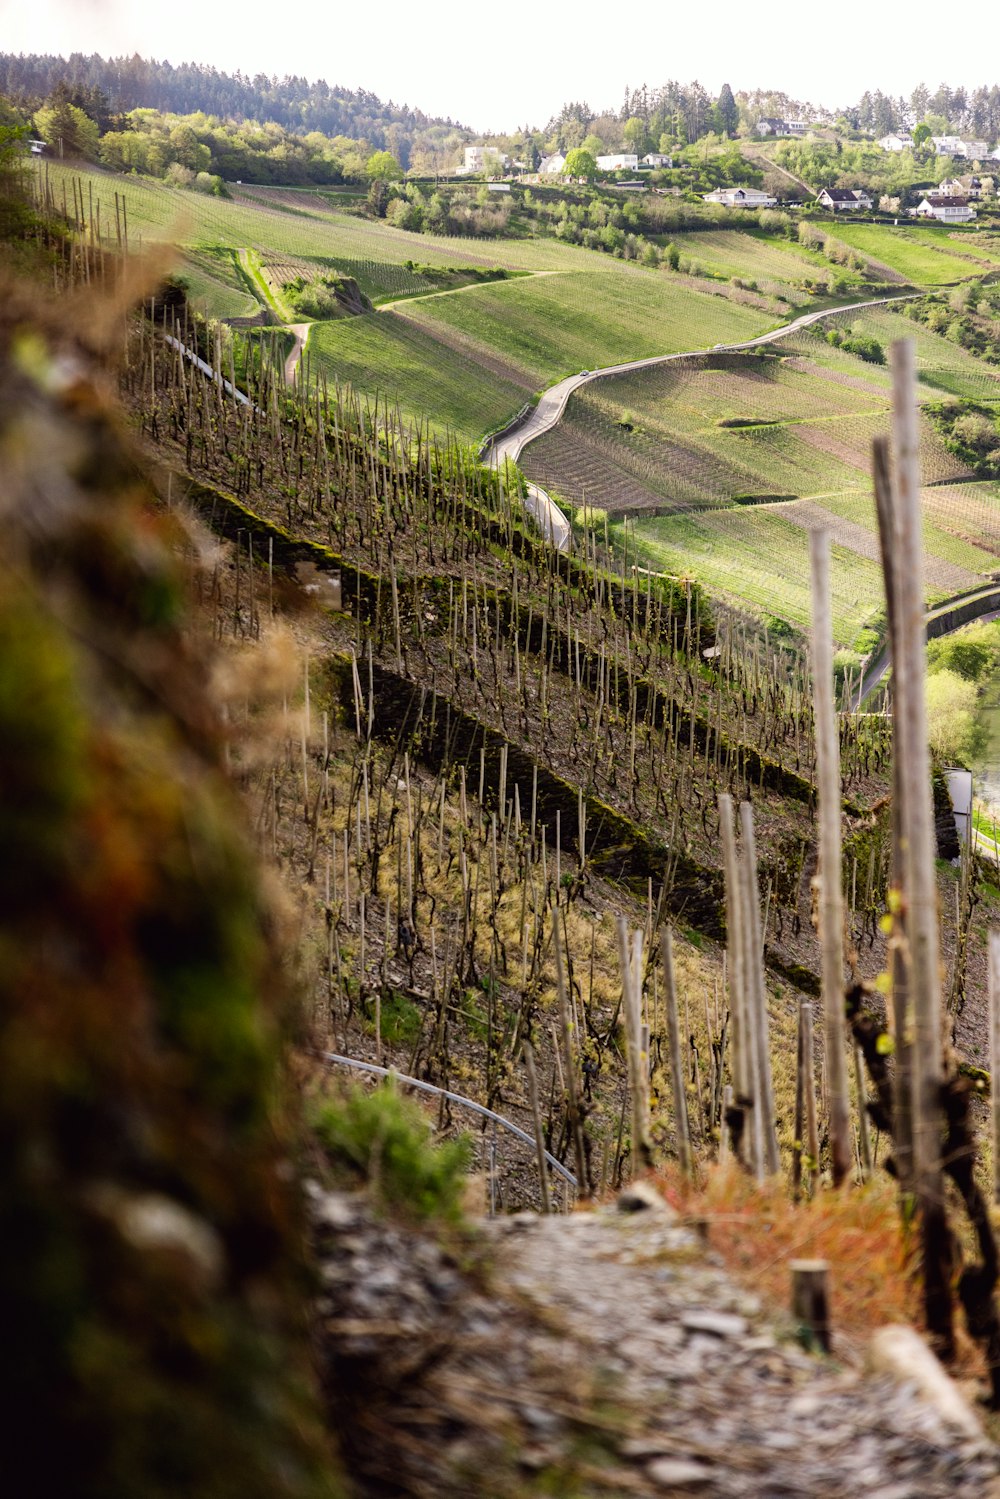 a view of a vineyard from a hill